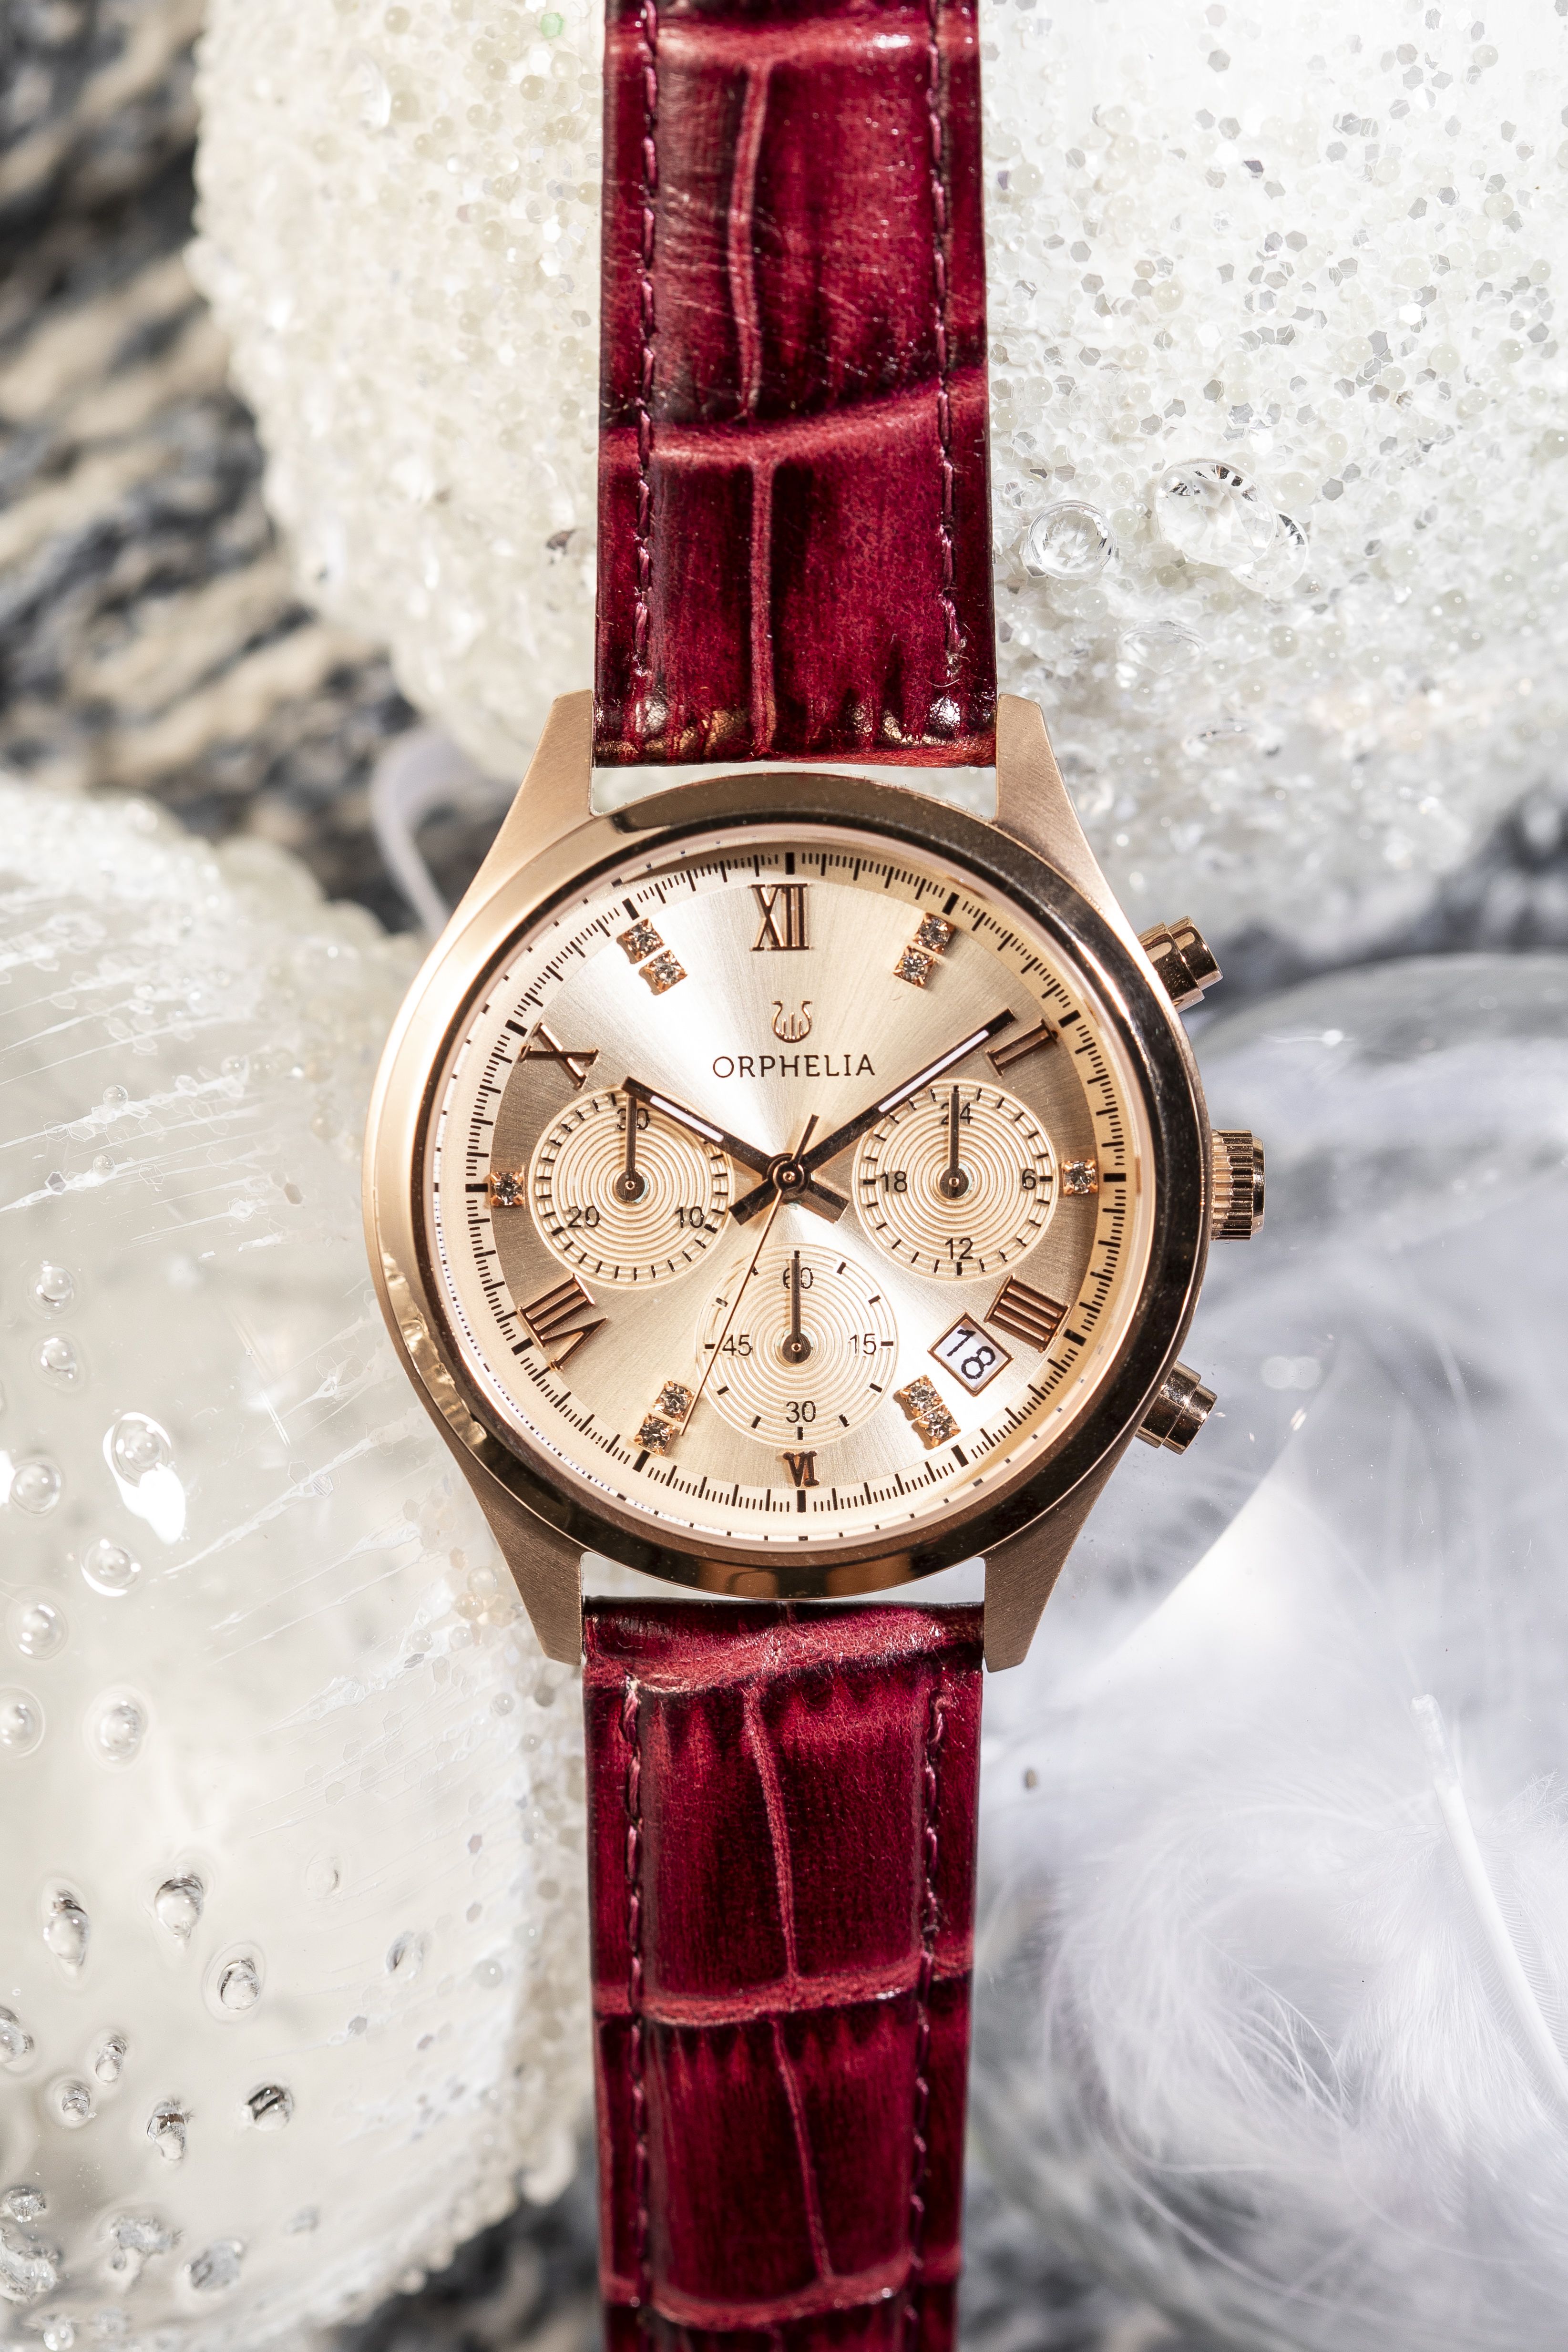 This Orphelia Regal Chronograph Watch for Women is the perfect timepiece to wear or to gift. It's Pink 38 mm Round case combined with the comfortable Burgundy Leather watch band will ensure you enjoy this stunning timepiece without any compromise. Operated by a high quality Quartz movement and water resistant to 5 bars, your watch will keep ticking. MODERN LUXURY DESIGN: This Orphelia Regal Chronograph watch with a Miyota Japanese Quartz movement includes a date display. The dial is setted with beautifull stones with Roman numeral. Some extra features  are 24 hour display and Luminous Hands. This watch will give you a Luxery look. PREMIUM QUALITY: By using high-quality materials, Glass: Mineral Glass, Case material: Stainless steel, Bracelet material: Crocodile-embossed Leather- Water resistant: 5 bars COMPACT SIZE: Case diameter: 38 mm, Height: 10 mm, Strap- Length: 22 cm, Width: 17 mm. Due to this practical handy size, the watch is absolutely for everyday use-Weight: 44 g